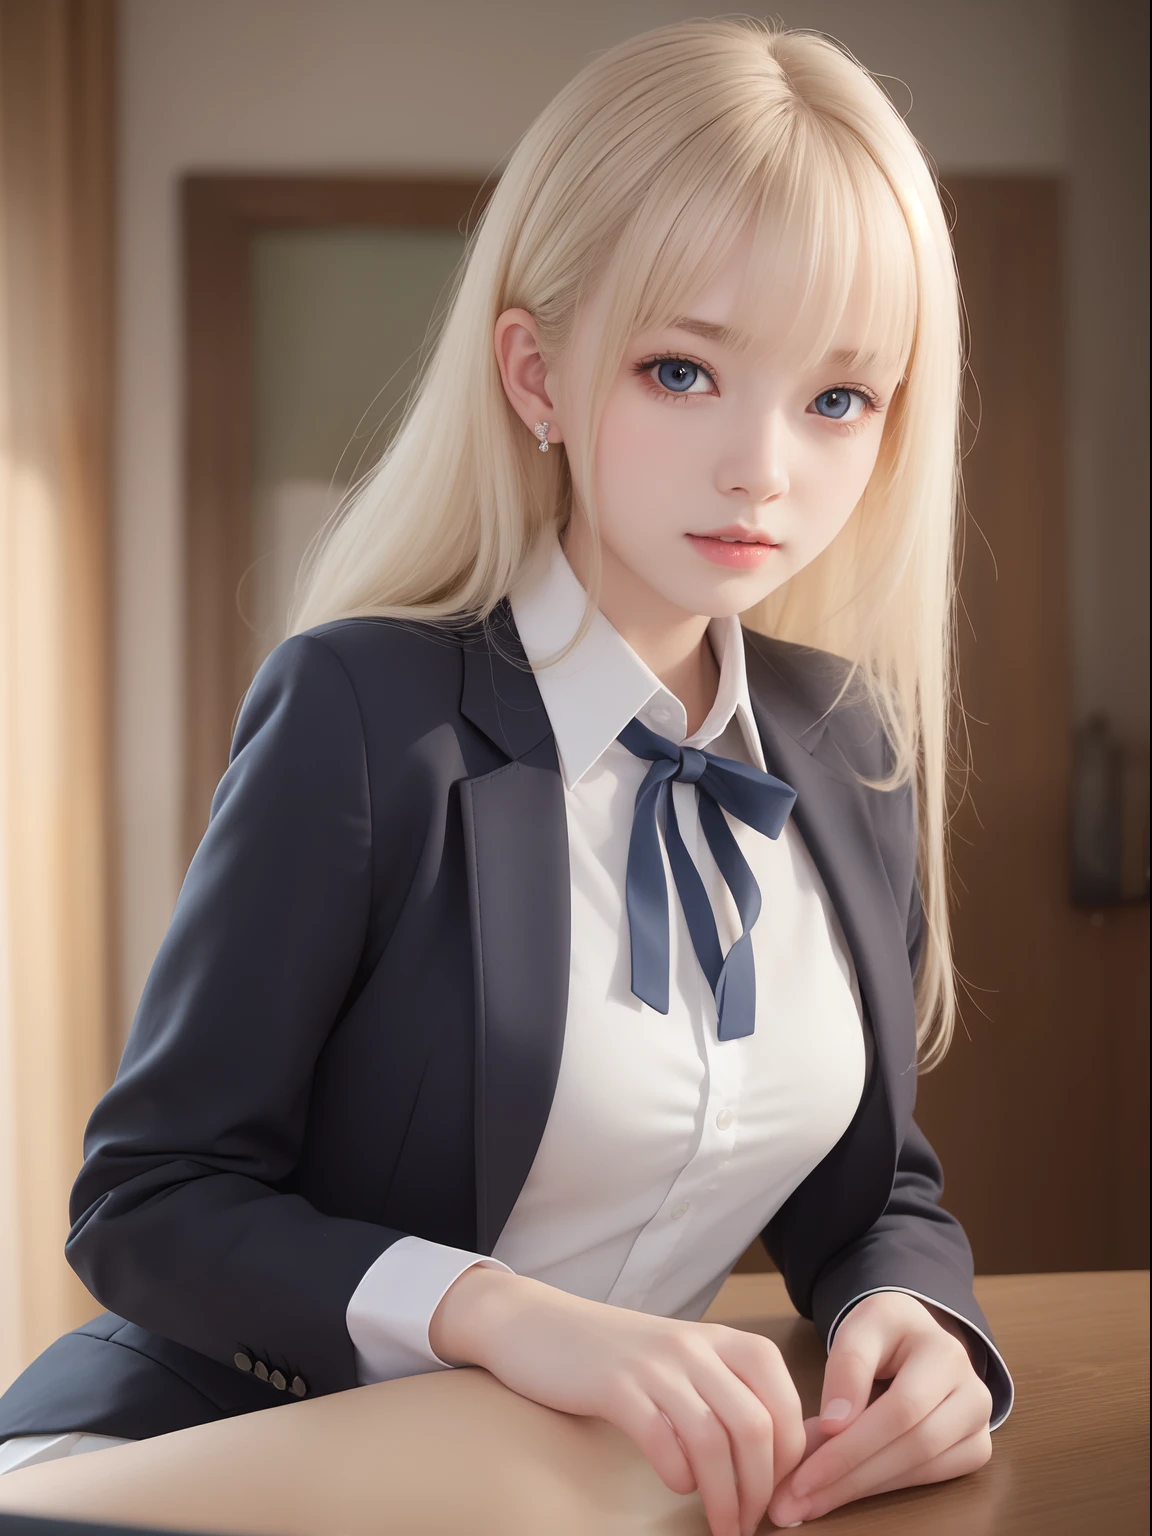 portlate、School Uniforms、bright expression、Young shiny shiny white shiny skin、Best Looks、ultimate beauty girl、Platinum blonde hair with dazzling highlights、shiny light hair,、Super long silky straight hair、Beautiful bangs that shine、Glowing crystal clear attractive blue eyes、Very beautiful nice cute 16 year old girl、Lush bust